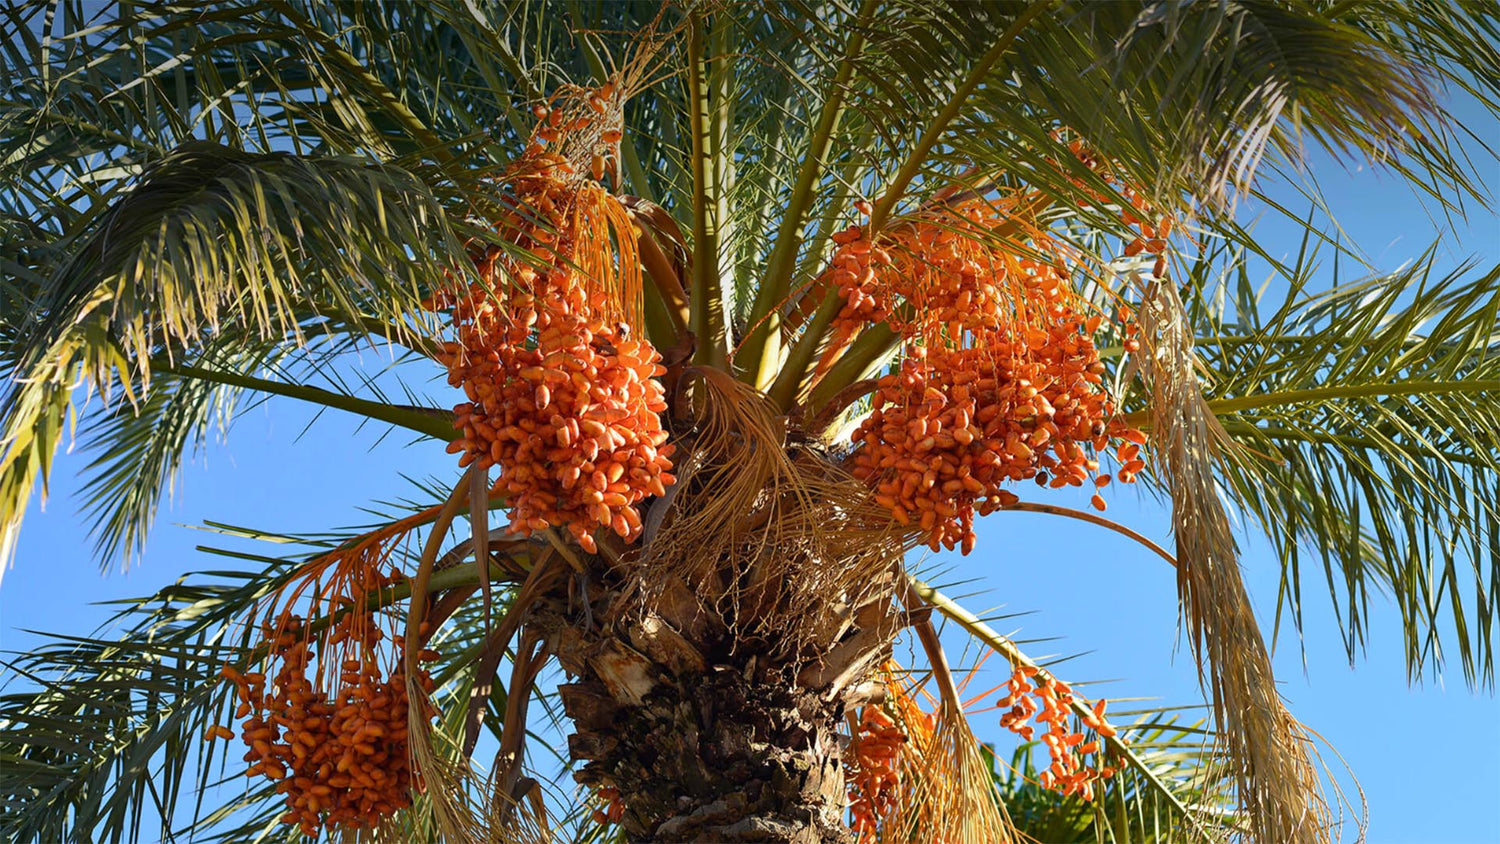 Palm oil fruit - A photo of a palm tree cultivated for the production of palm oil. The tree has a tall, slender trunk and large, fan-shaped or feather-like leaves at the top.  The fruit is typically oval-shaped, about the size of a plum, and grows in clusters called bunches. Each fruit has a tough outer shell or husk, which may be reddish or brown in color, and contains a fleshy pulp and a hard seed or kernel.